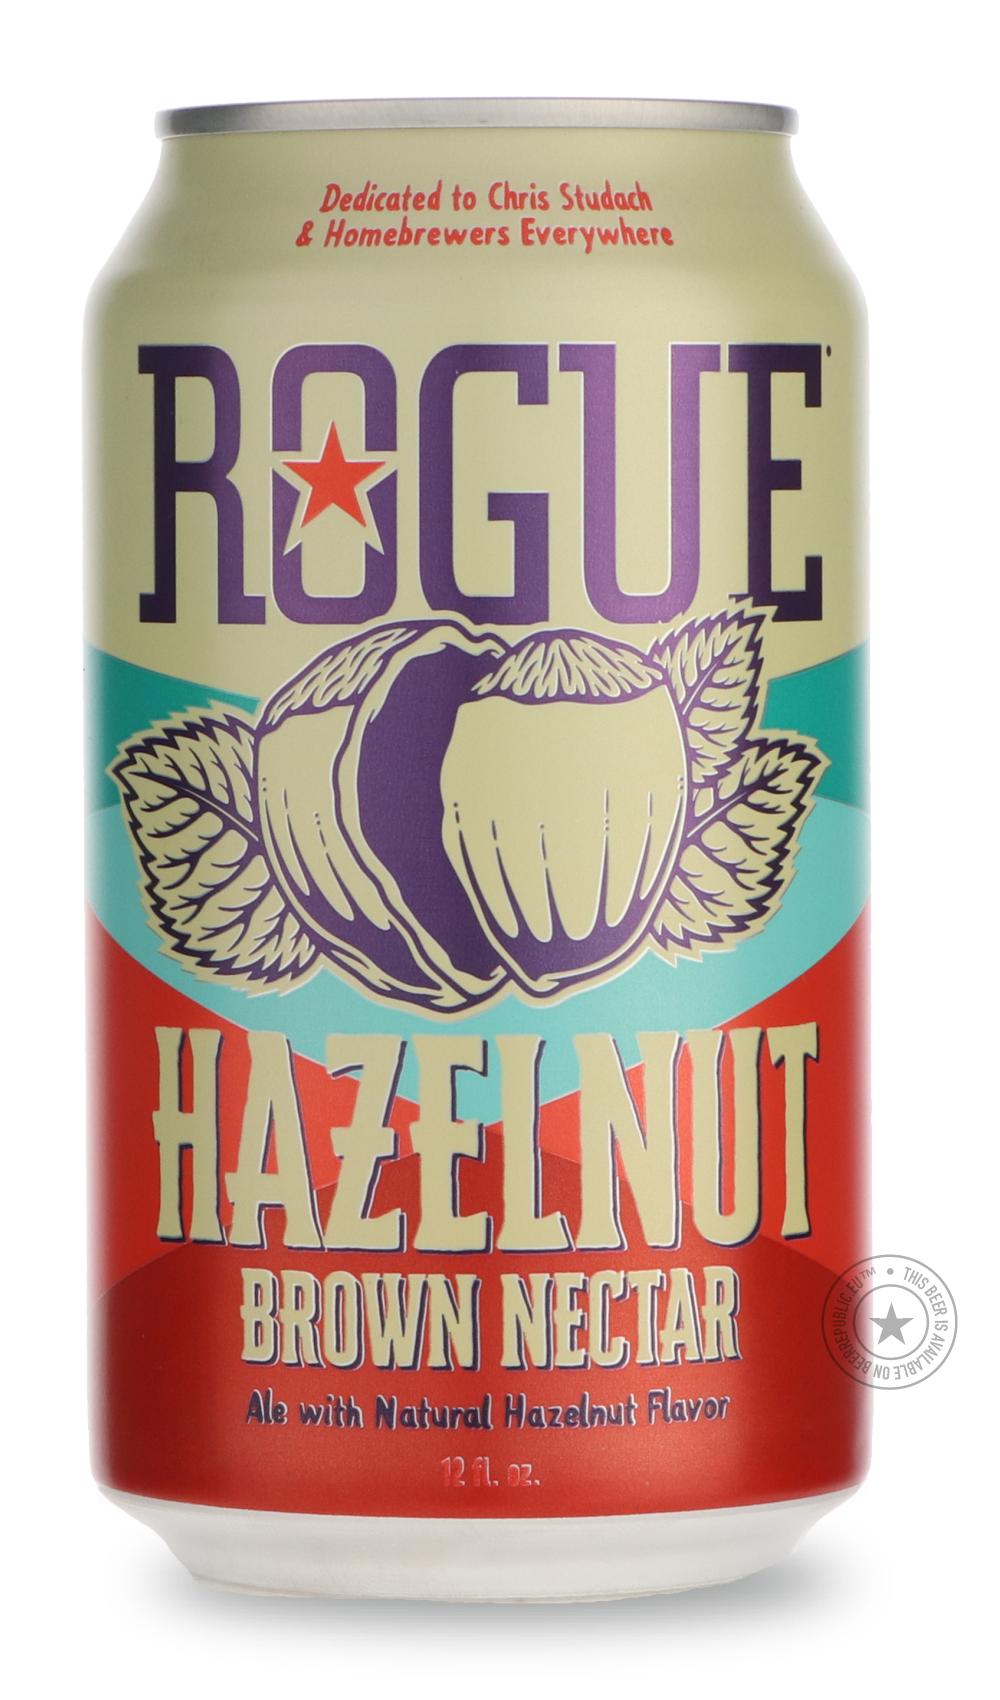 -Rogue- Hazelnut Brown Nectar-Brown & Dark- Only @ Beer Republic - The best online beer store for American & Canadian craft beer - Buy beer online from the USA and Canada - Bier online kopen - Amerikaans bier kopen - Craft beer store - Craft beer kopen - Amerikanisch bier kaufen - Bier online kaufen - Acheter biere online - IPA - Stout - Porter - New England IPA - Hazy IPA - Imperial Stout - Barrel Aged - Barrel Aged Imperial Stout - Brown - Dark beer - Blond - Blonde - Pilsner - Lager - Wheat - Weizen - Am